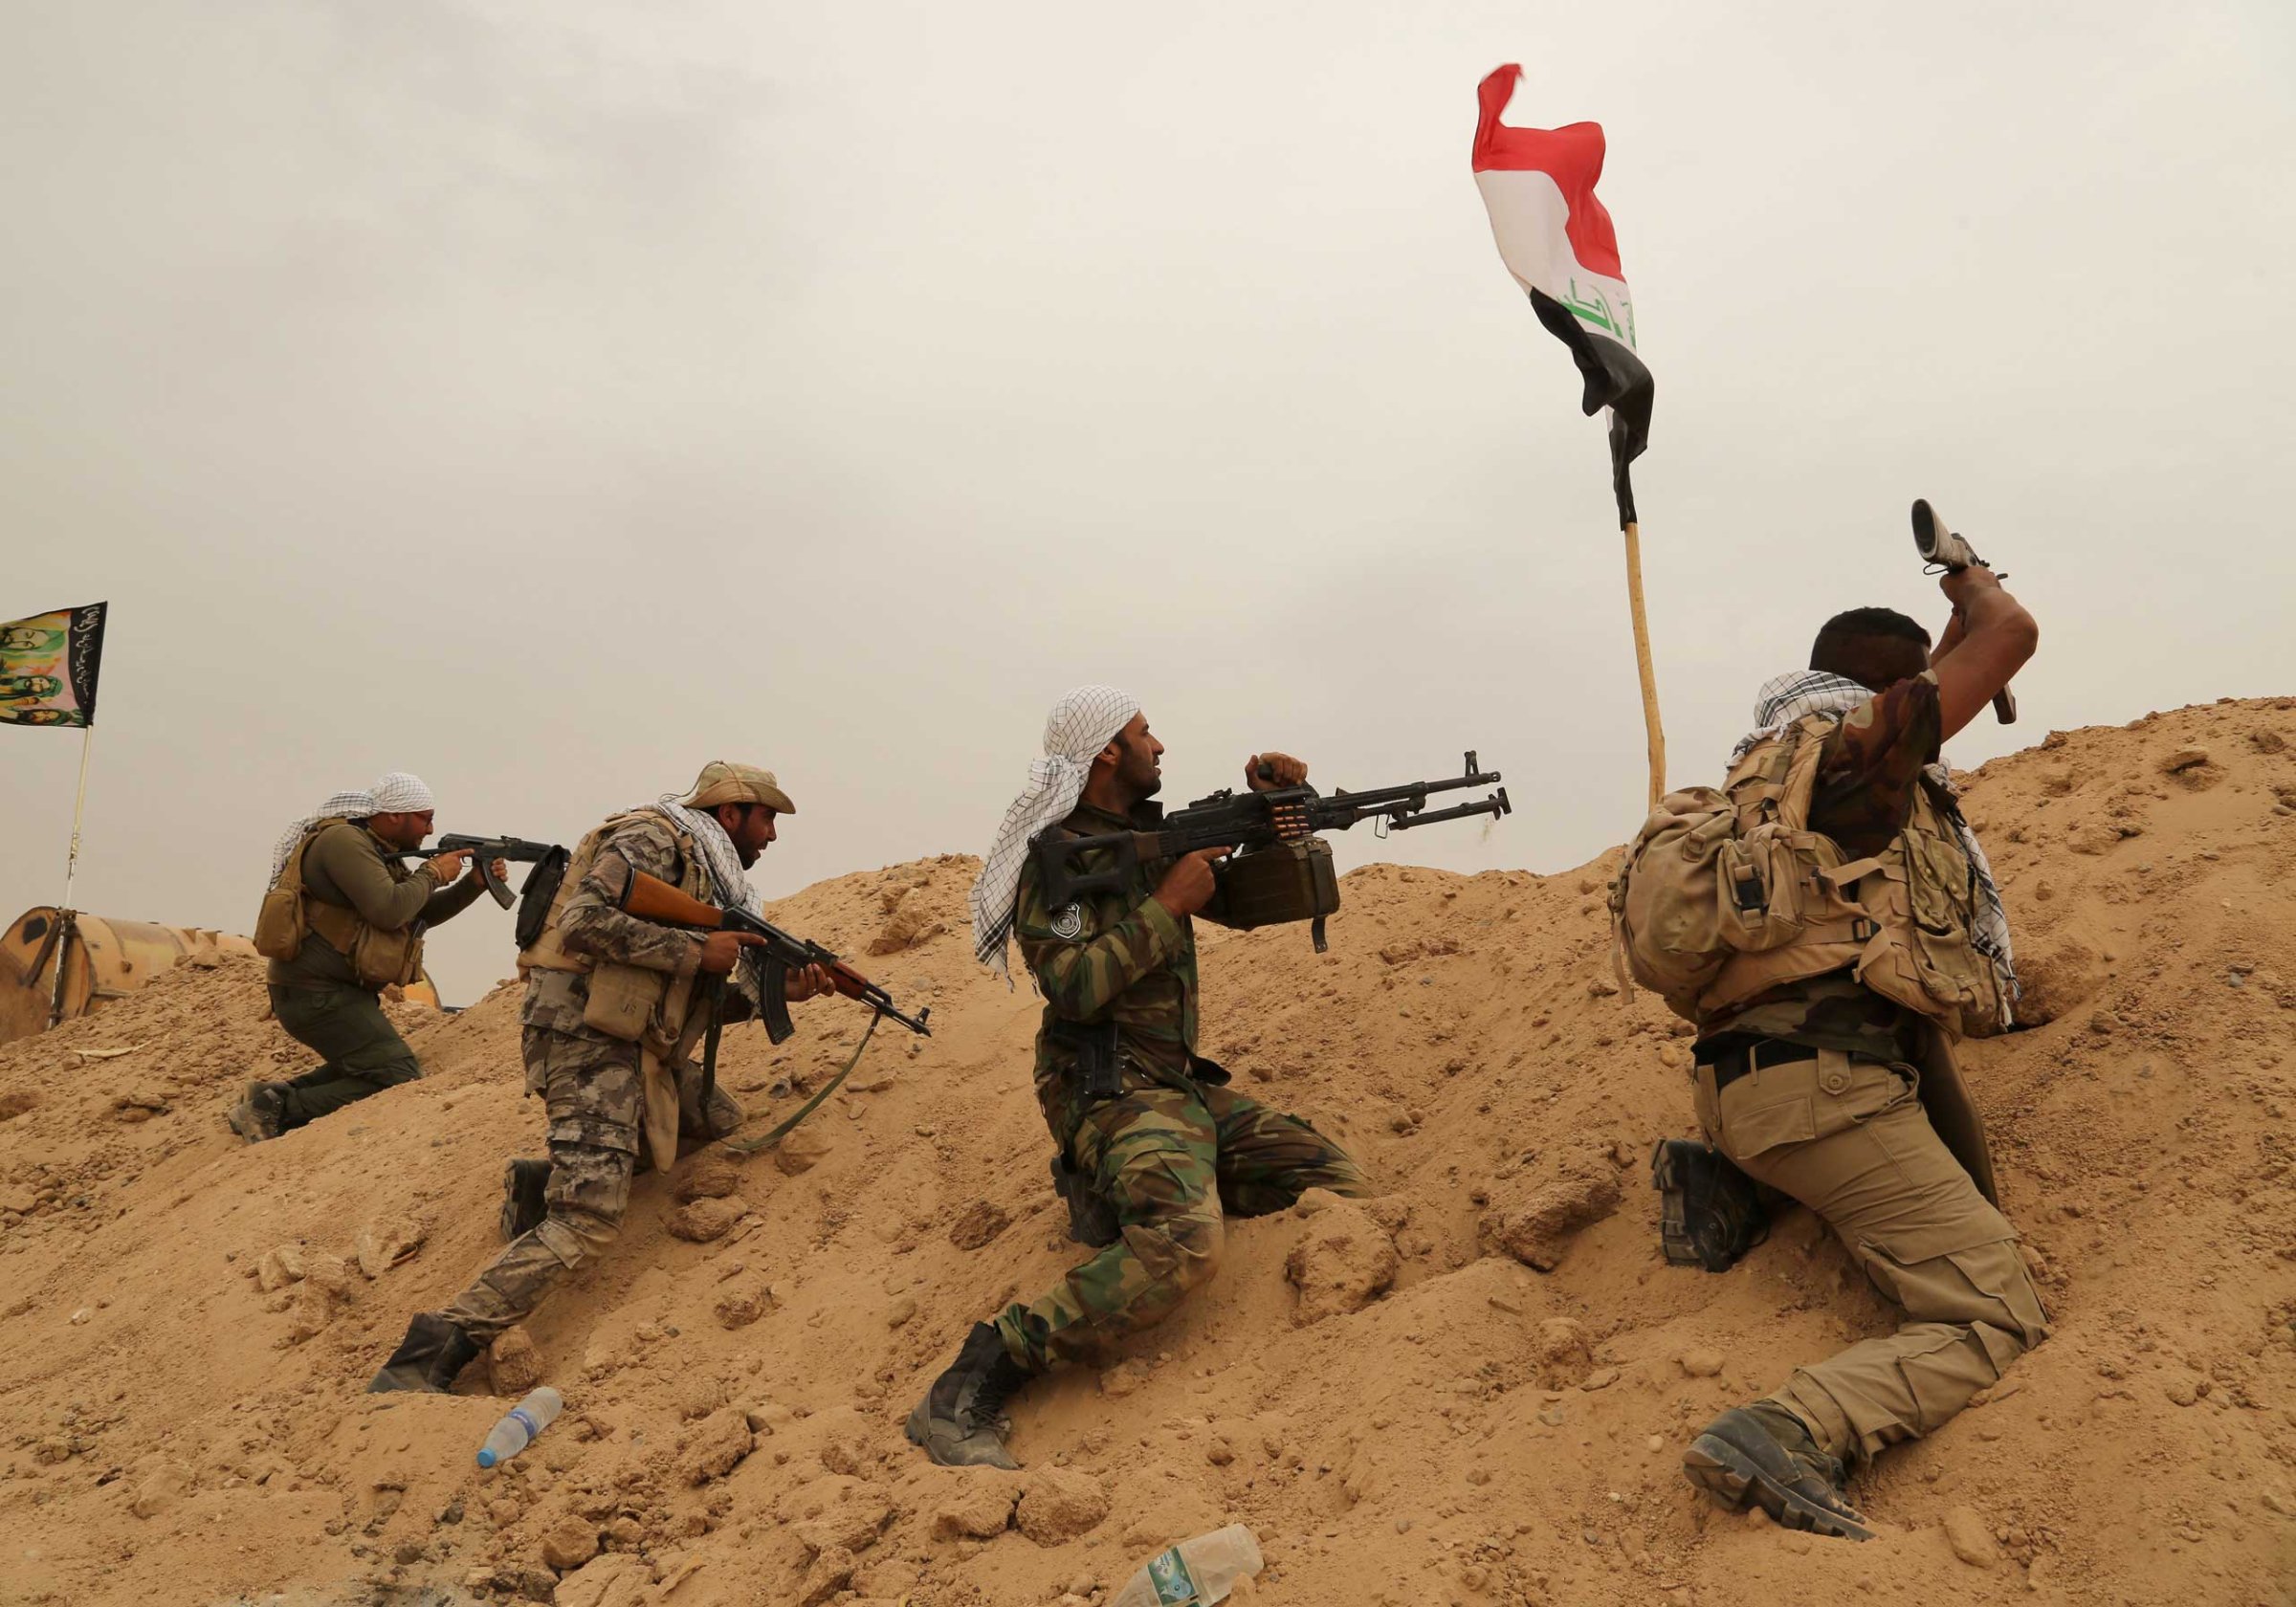 Fighters from Badr Brigades Shiite militia clash with Islamic State group militants at the front line on the outskirts of Fallujah, Anbar province, Iraq on June 1, 2015.